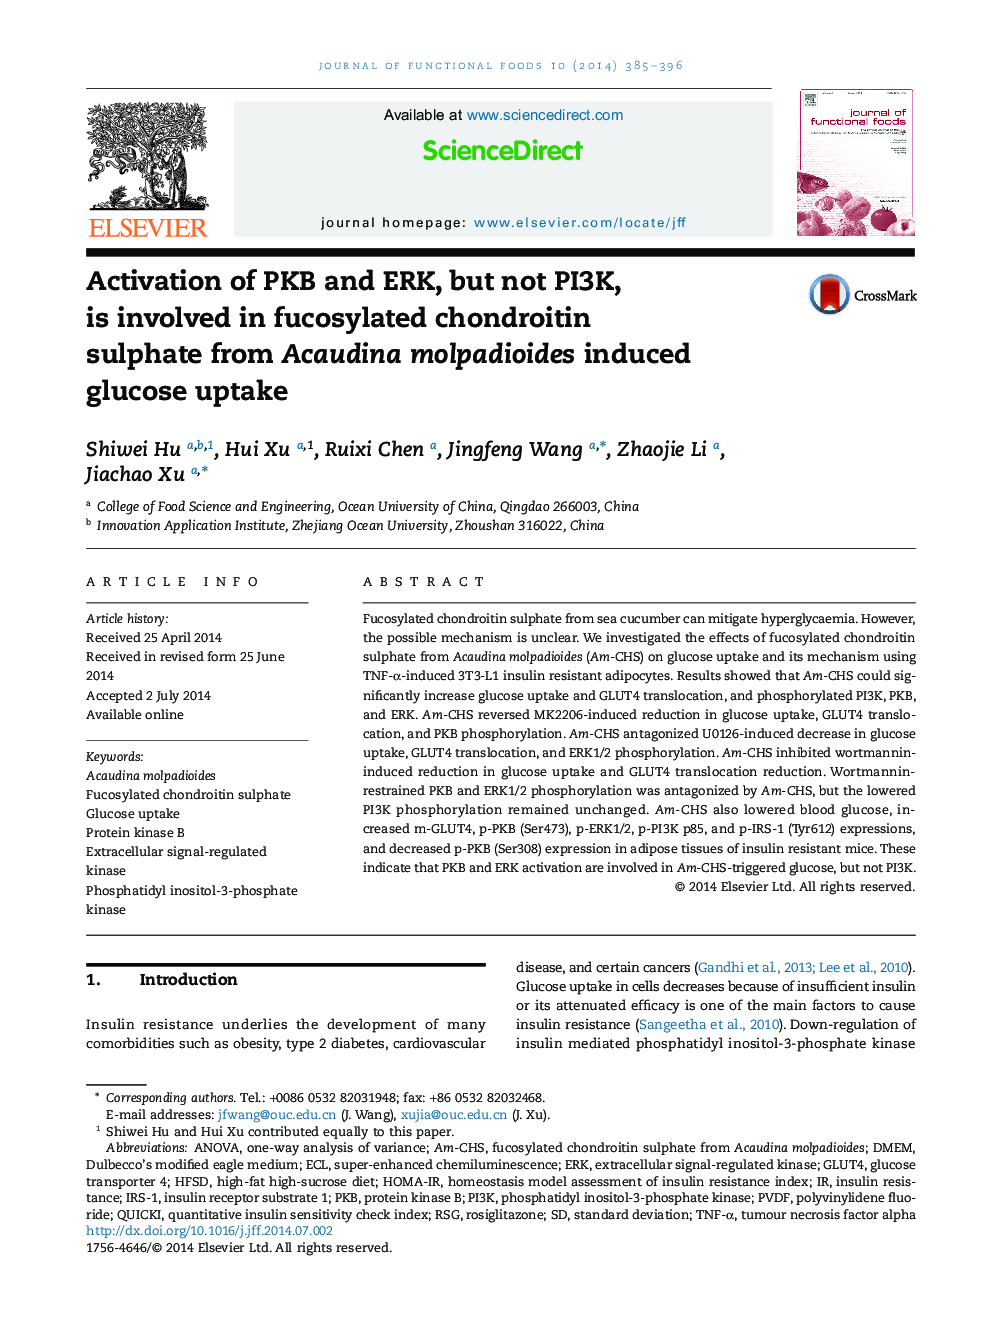 Activation of PKB and ERK, but not PI3K, is involved in fucosylated chondroitin sulphate from Acaudina molpadioides induced glucose uptake